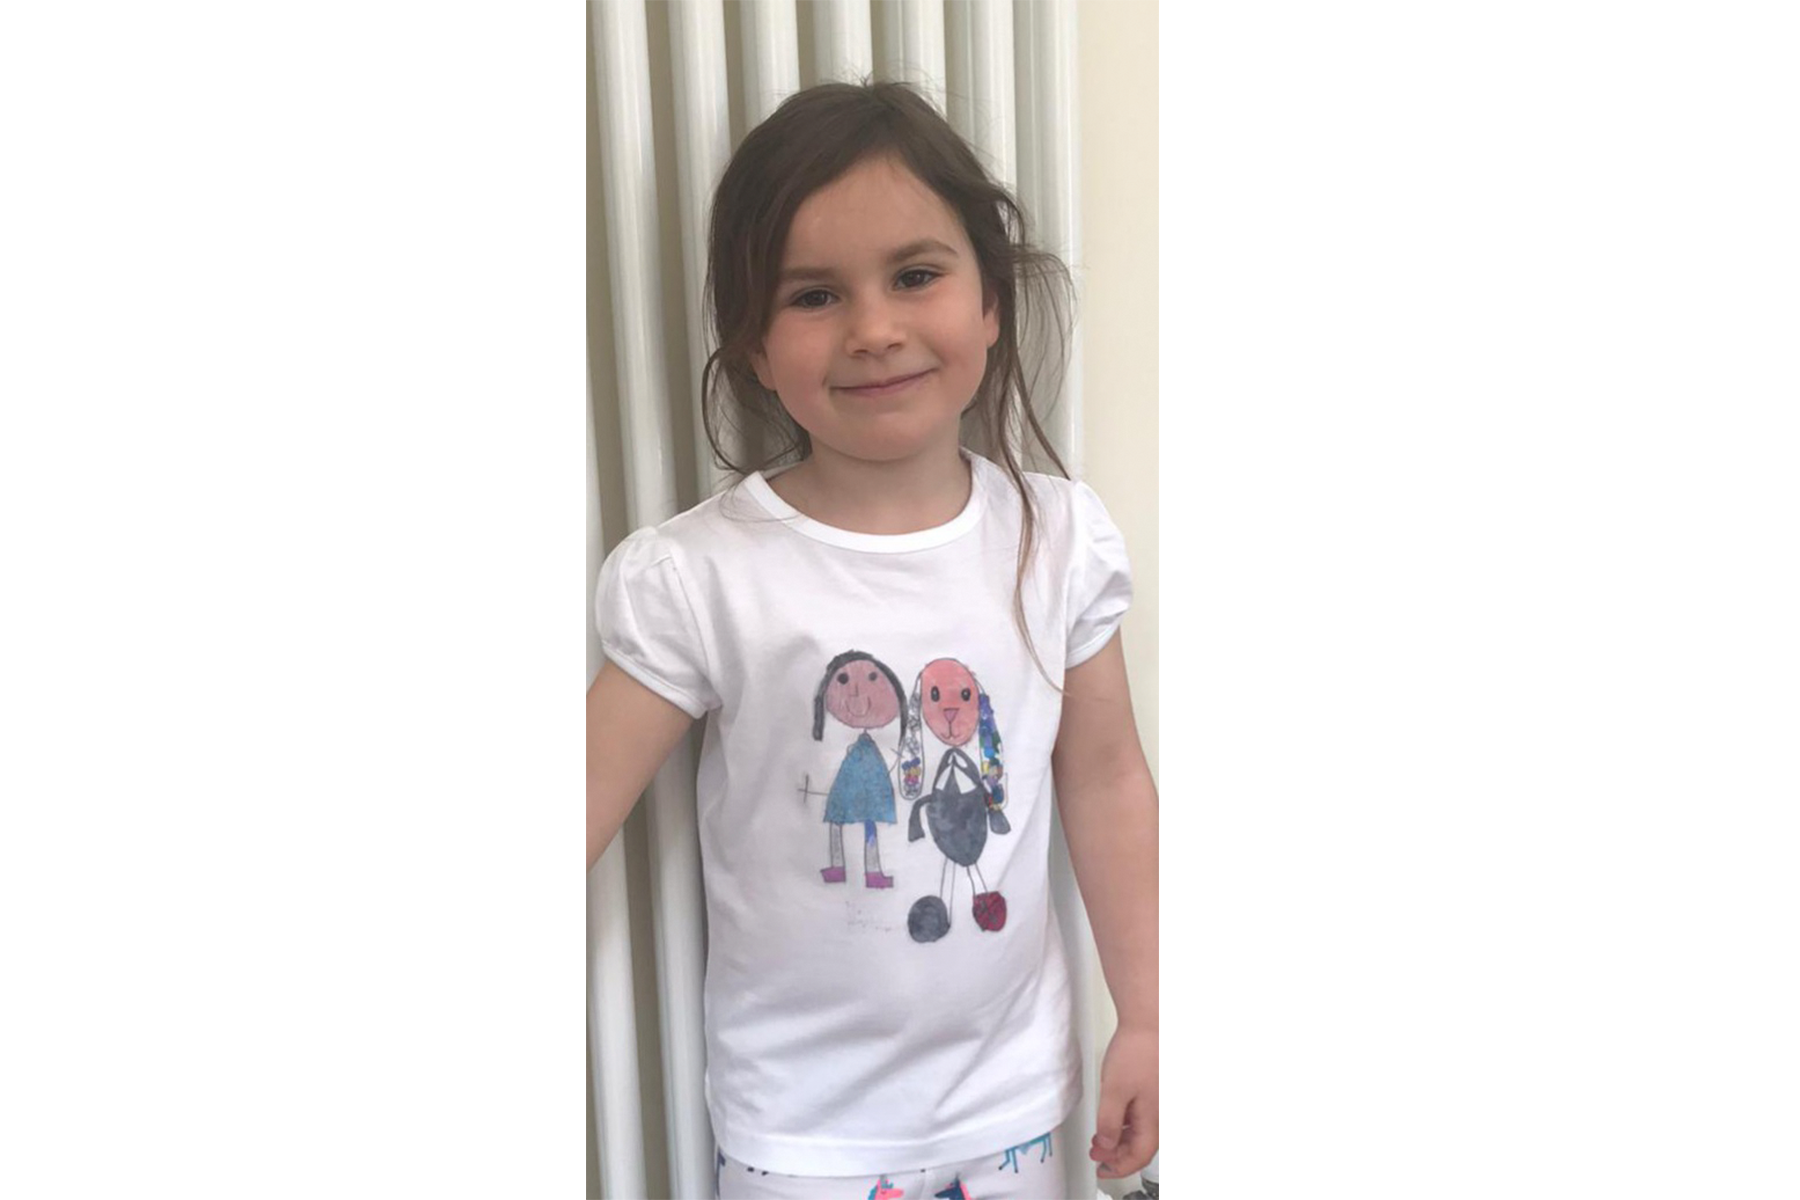 A young girl wearing a T-shirt with her drawing of herself and her cuddly toy on it